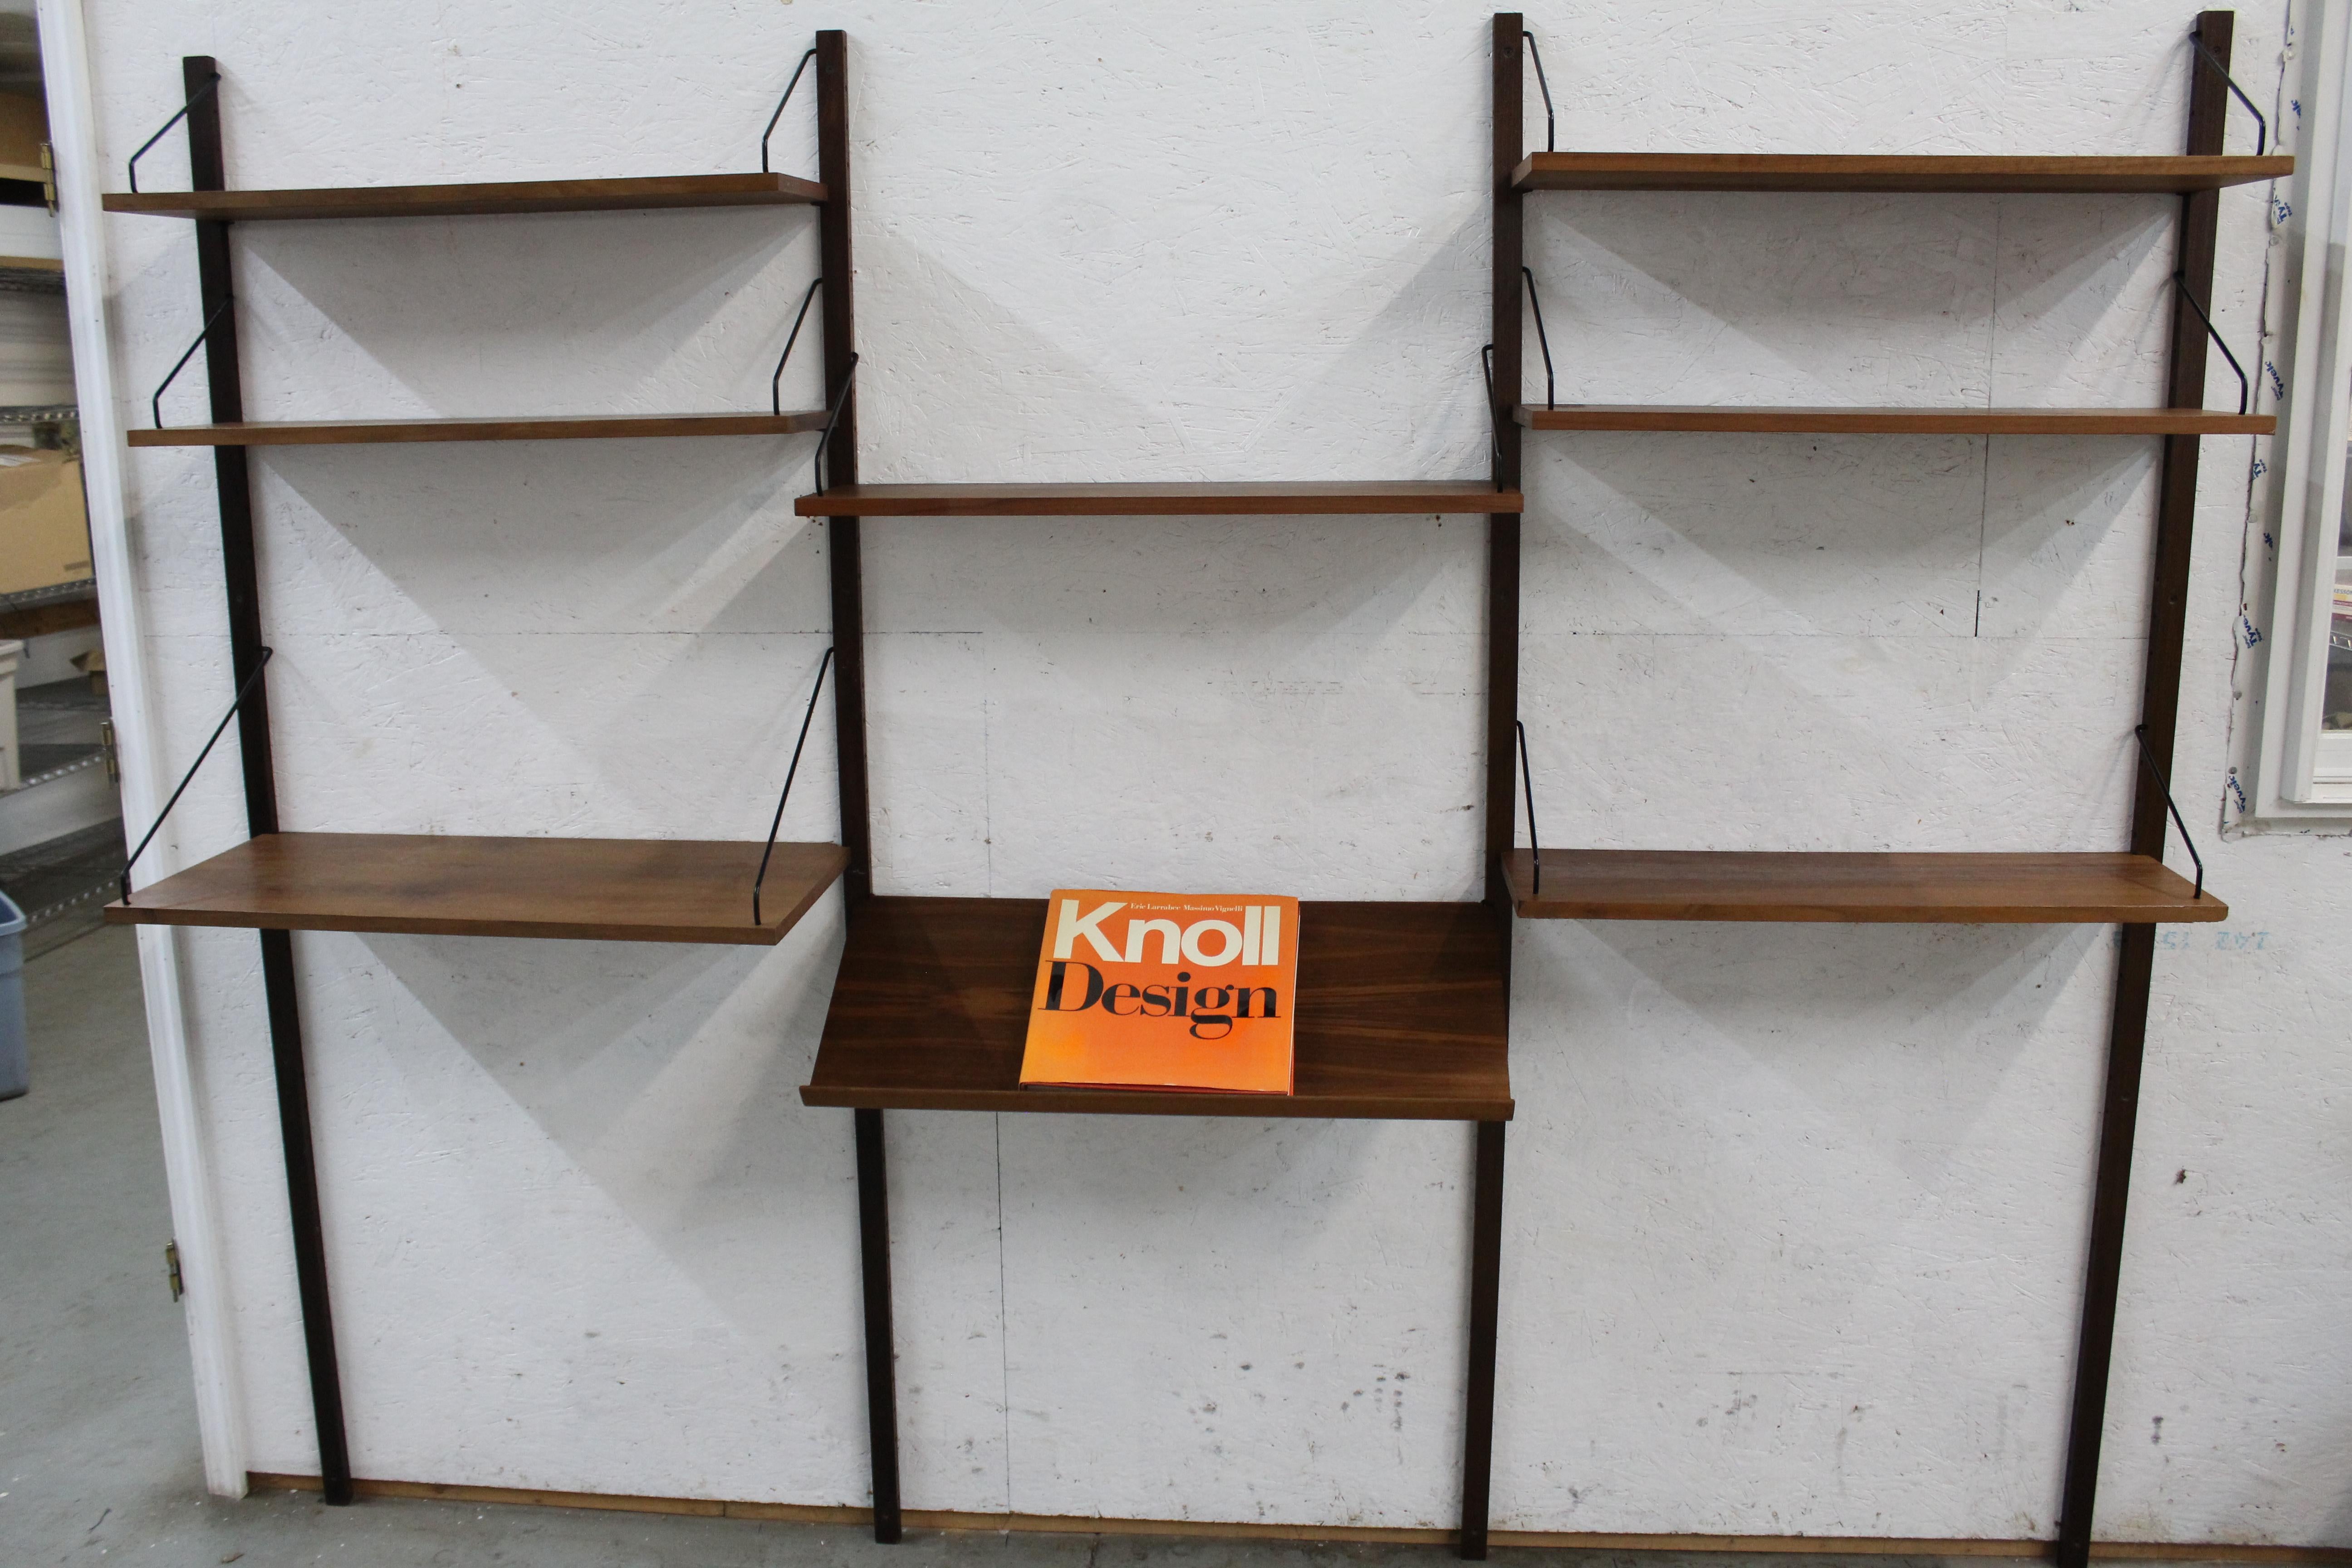 Mid-Century Danish Modern  Poul Cadovius for Cado Denmark Teak Wall Unit

Offered is a Danish modern teak wall unit that was designed by Poul Cadovius for Cado Denmark in the 1960s. This versatile unit features ample display and shelving. The unit